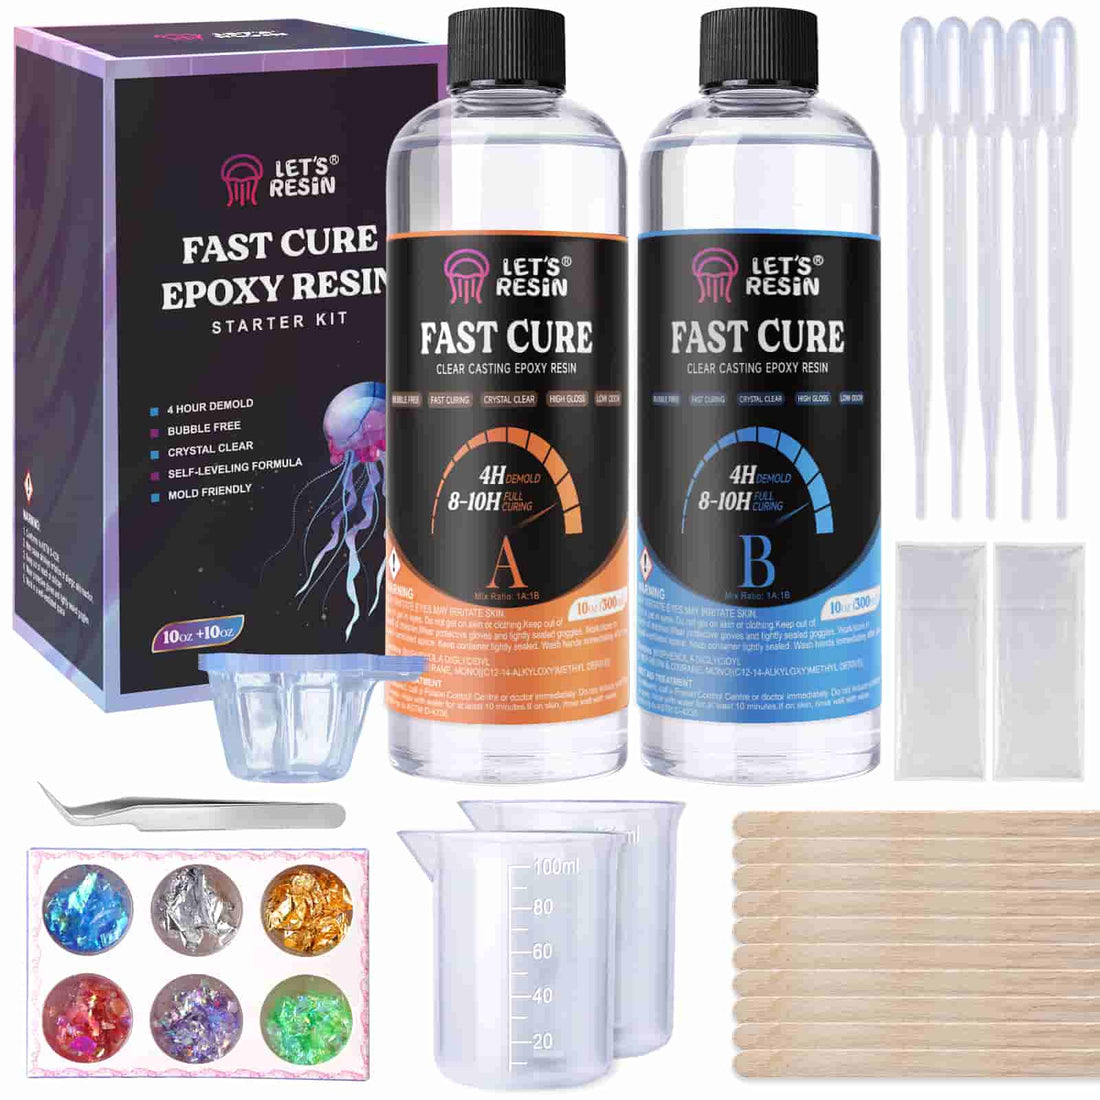 44oz Epoxy Resin Kit with Epoxy Mixer, Cups, Transfer Pipettes